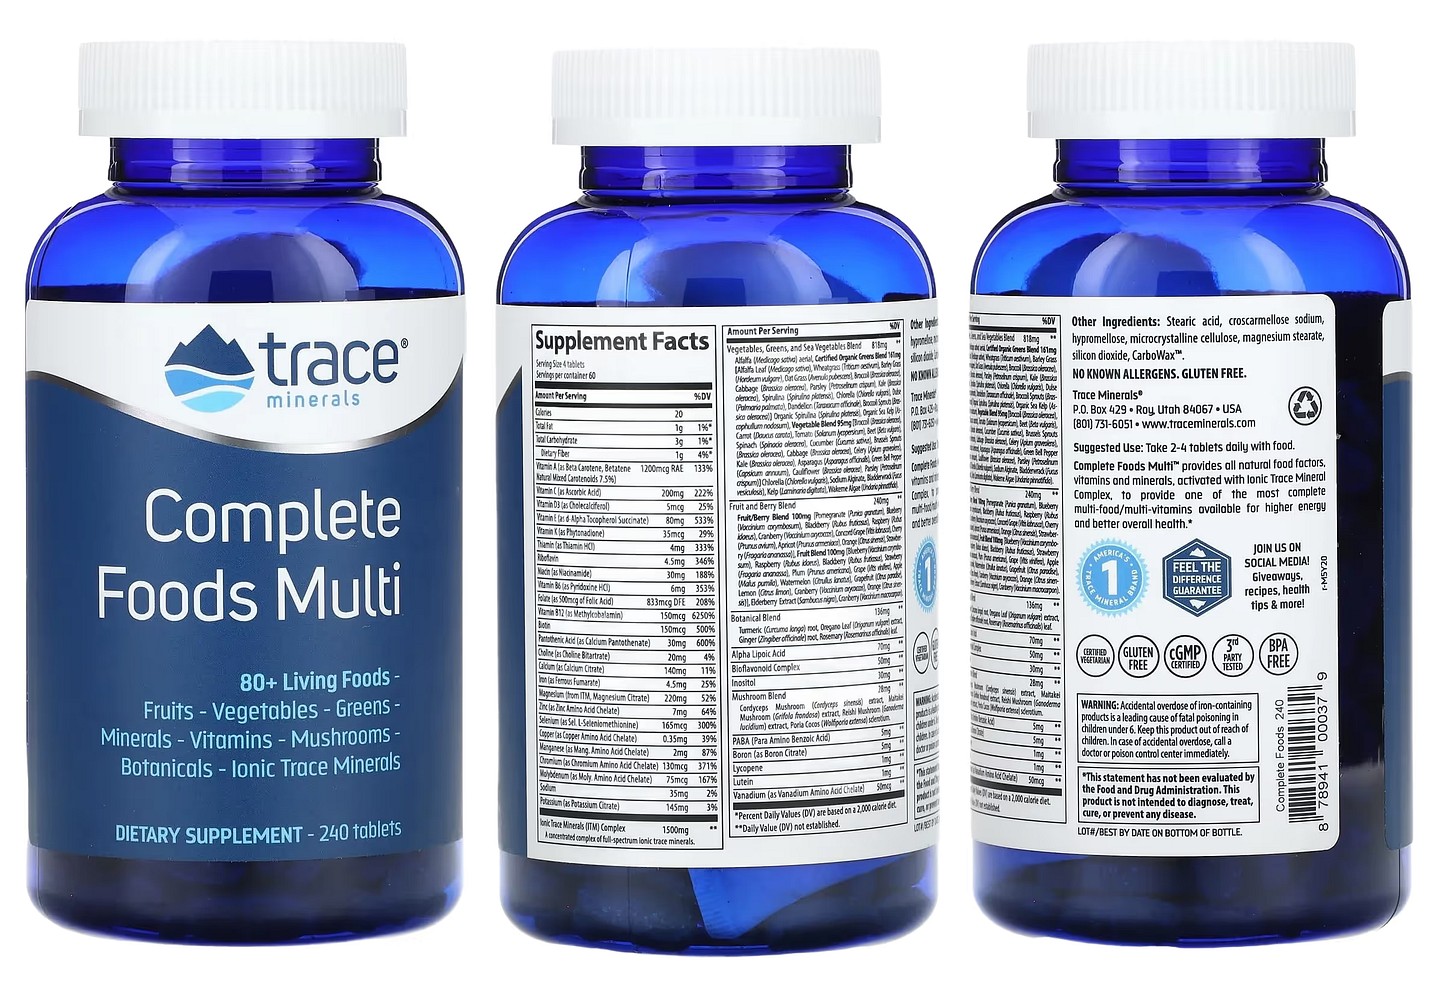 Trace Minerals, Complete Food Multi packaging